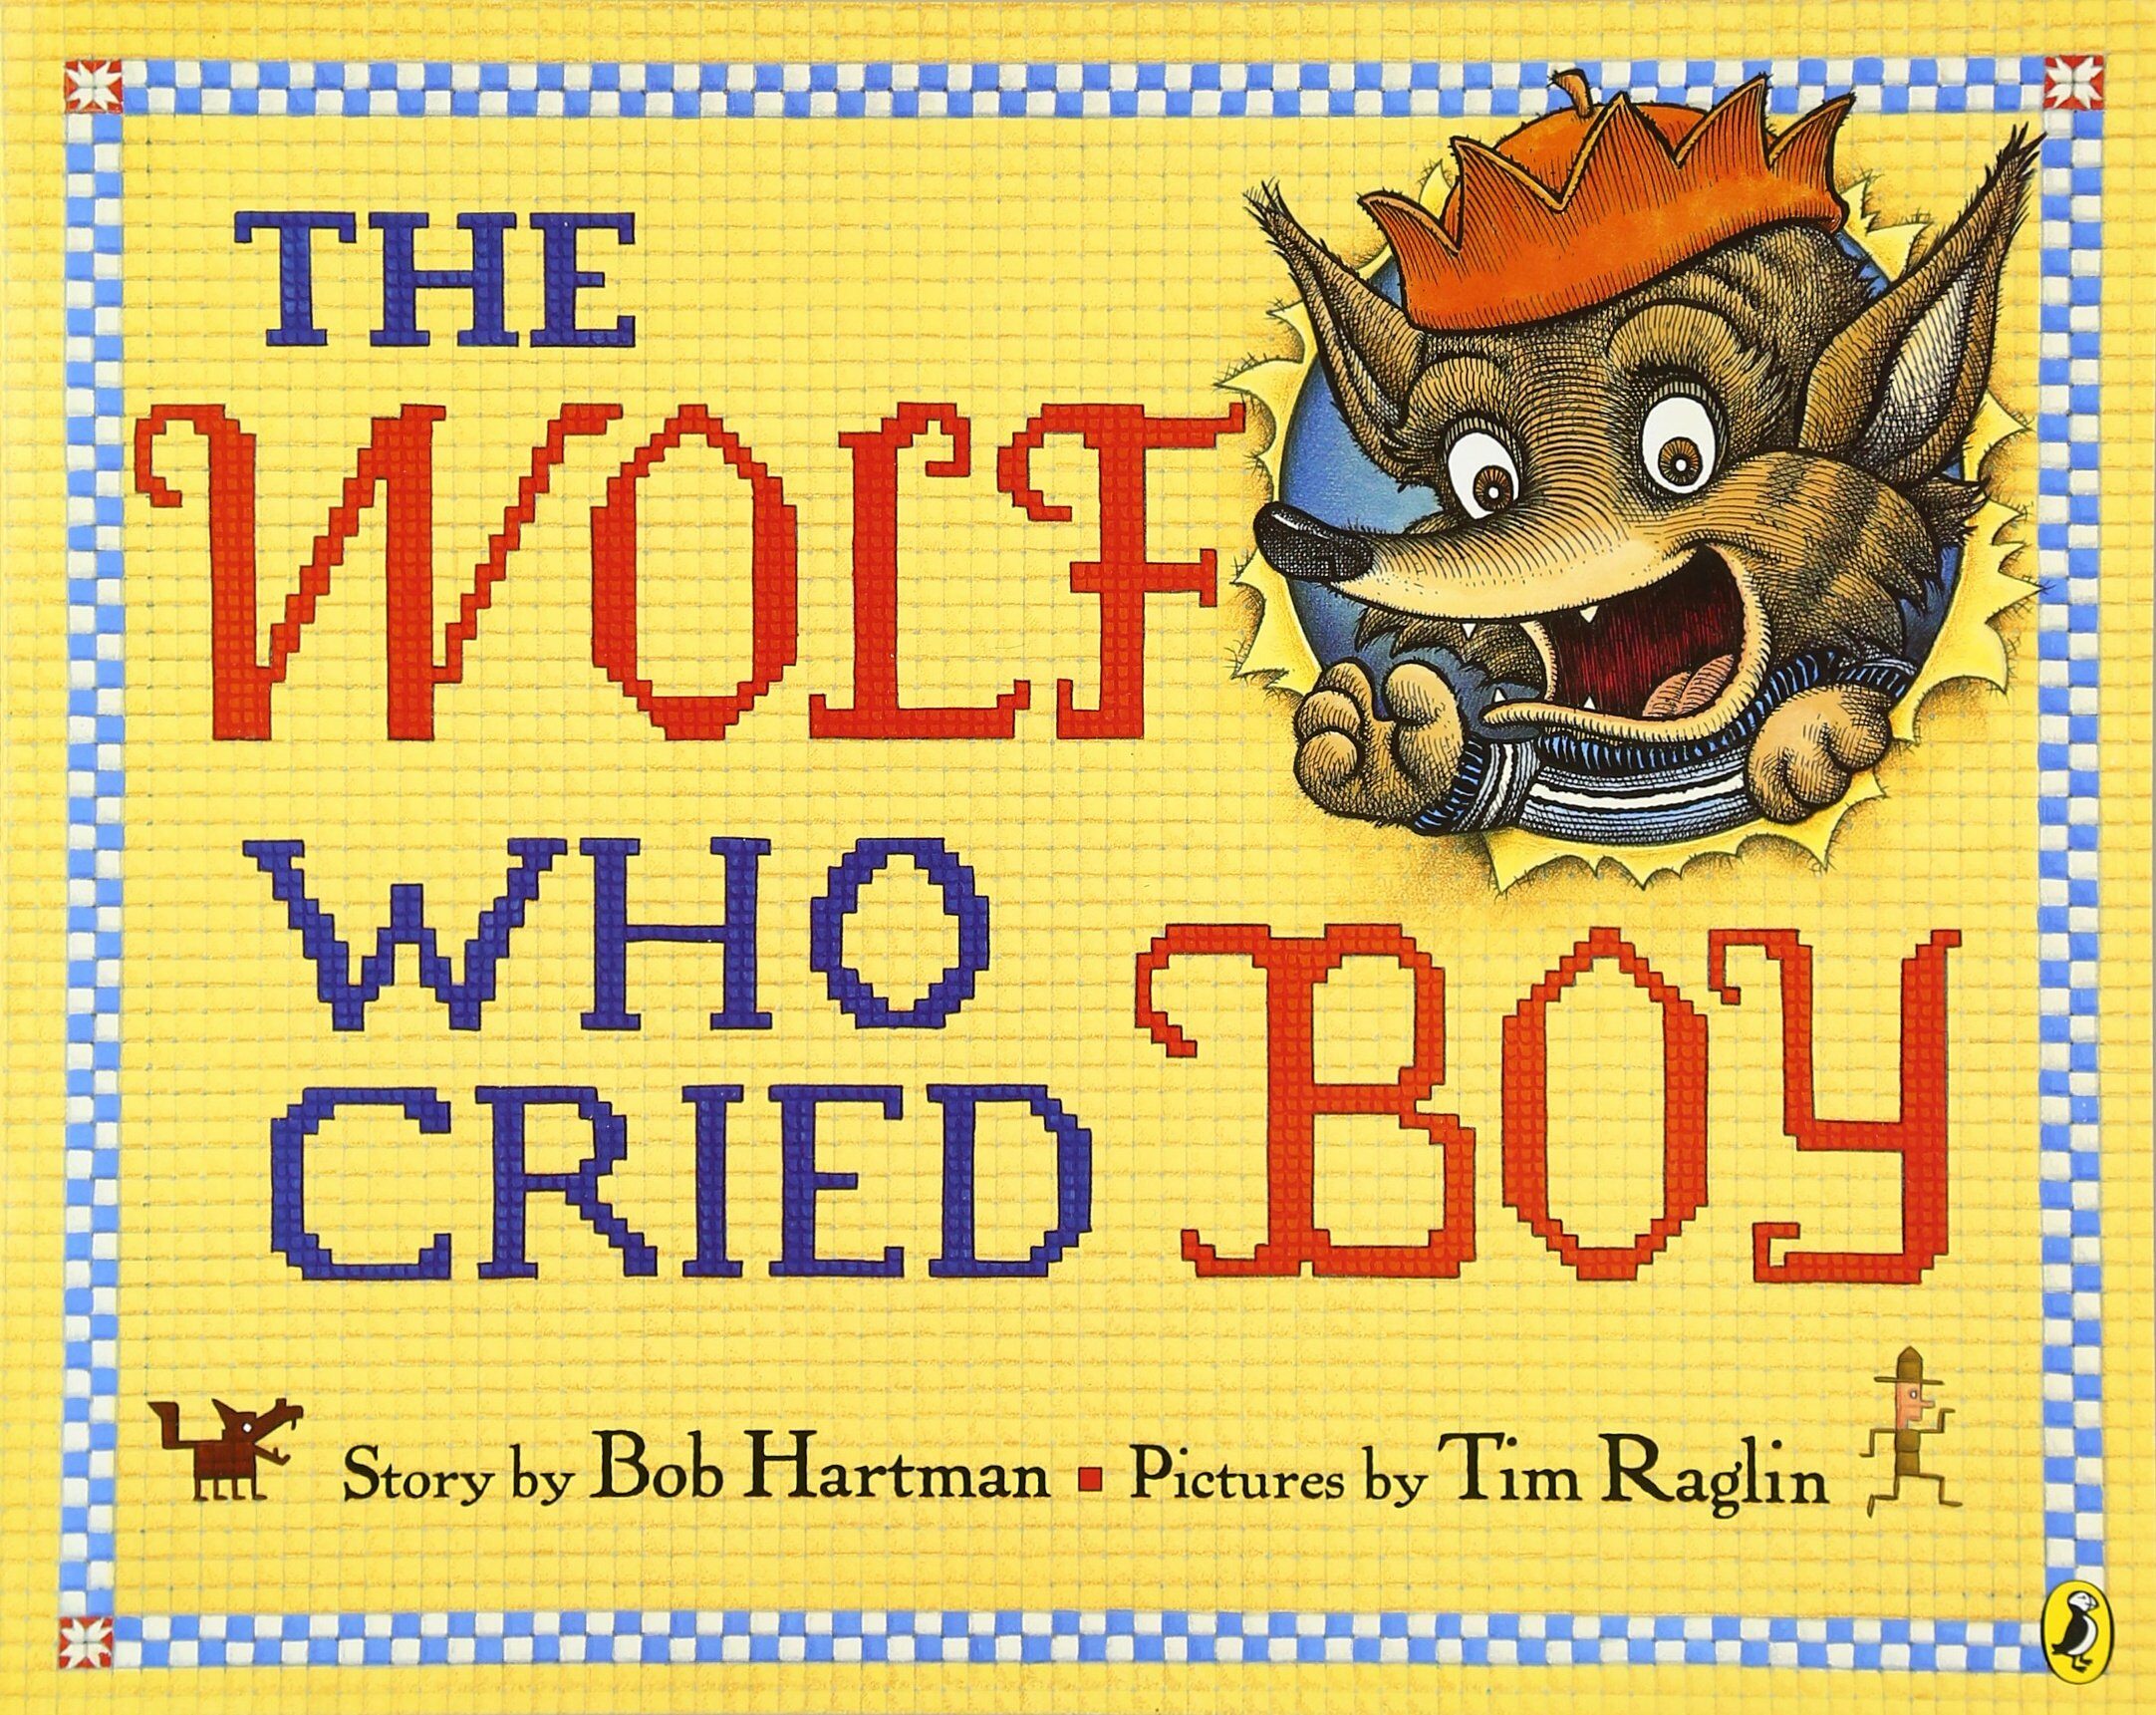 The Wolf Who Cried Boy (Paperback)